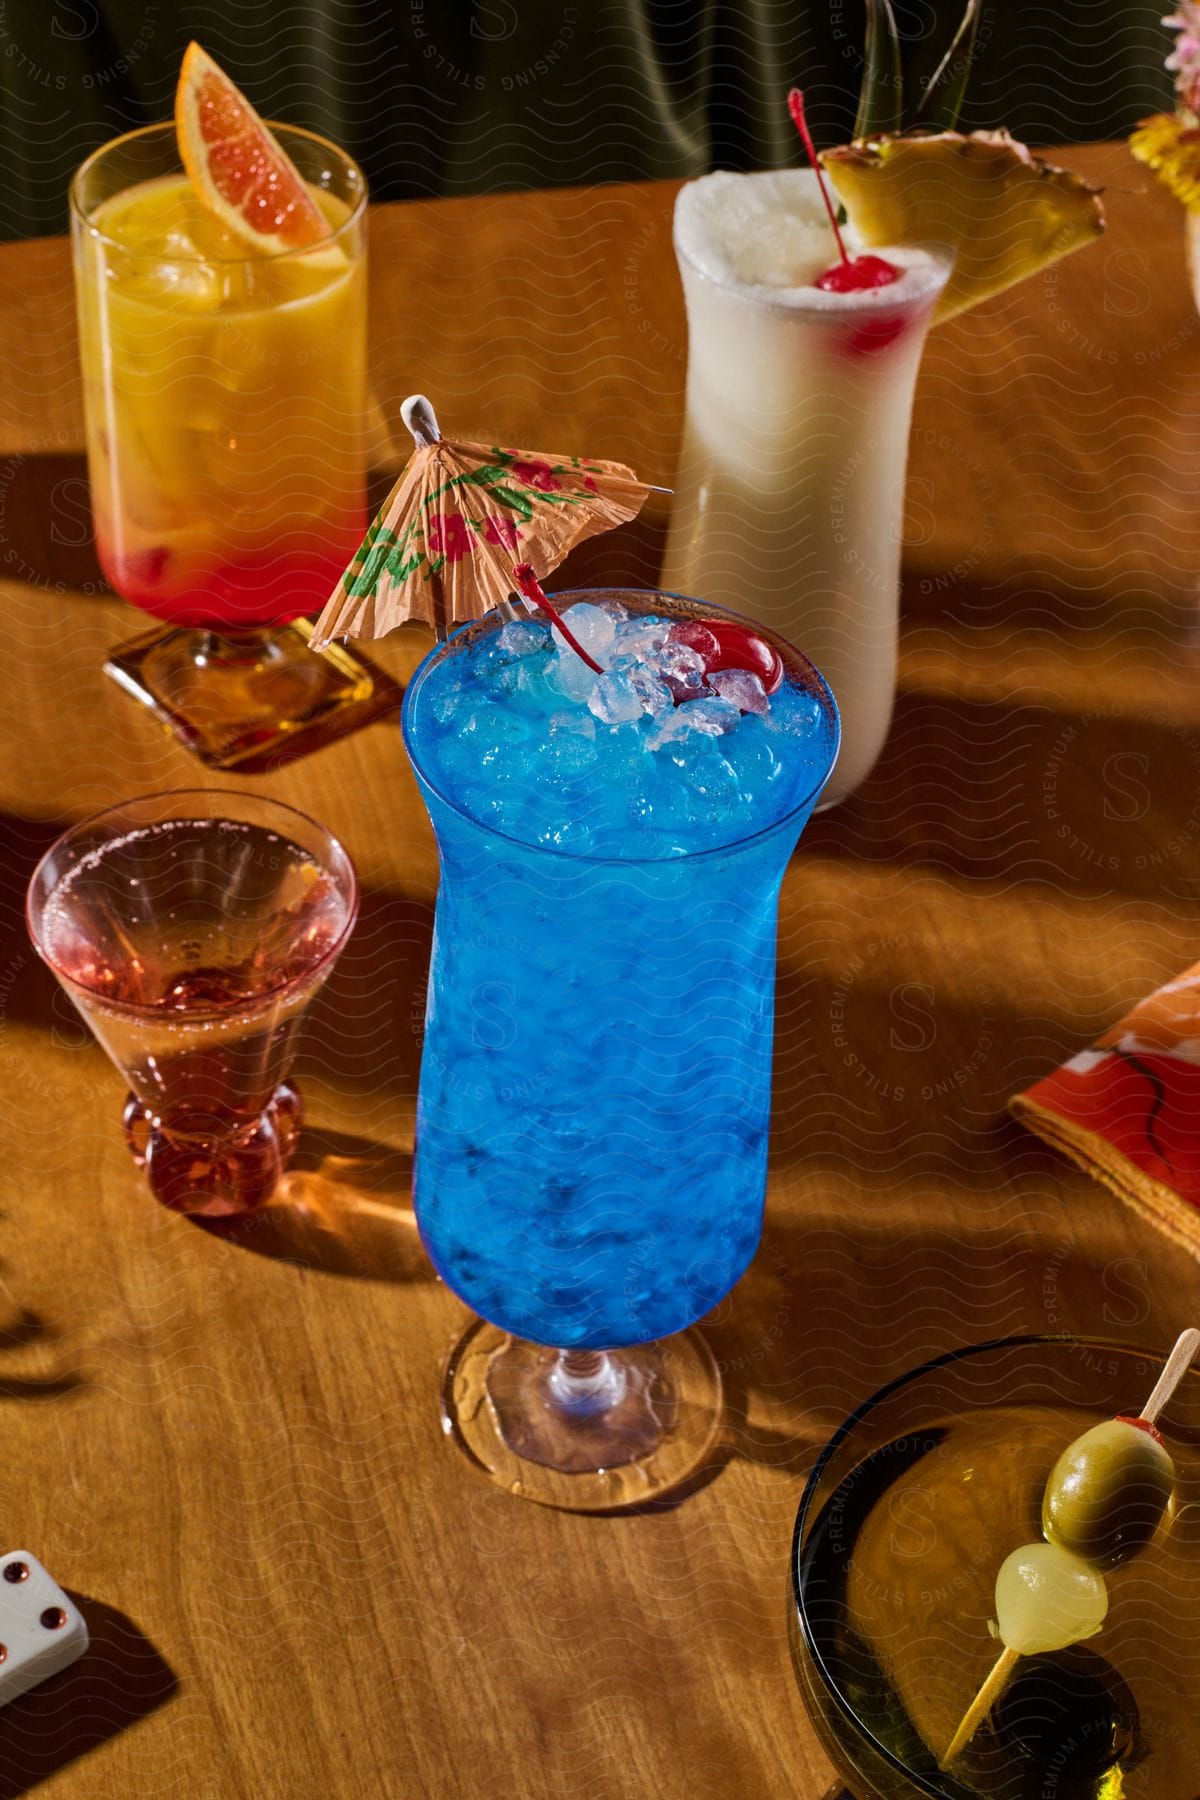 Stock photo of several cocktails and frozen drinks on a brown wood table.